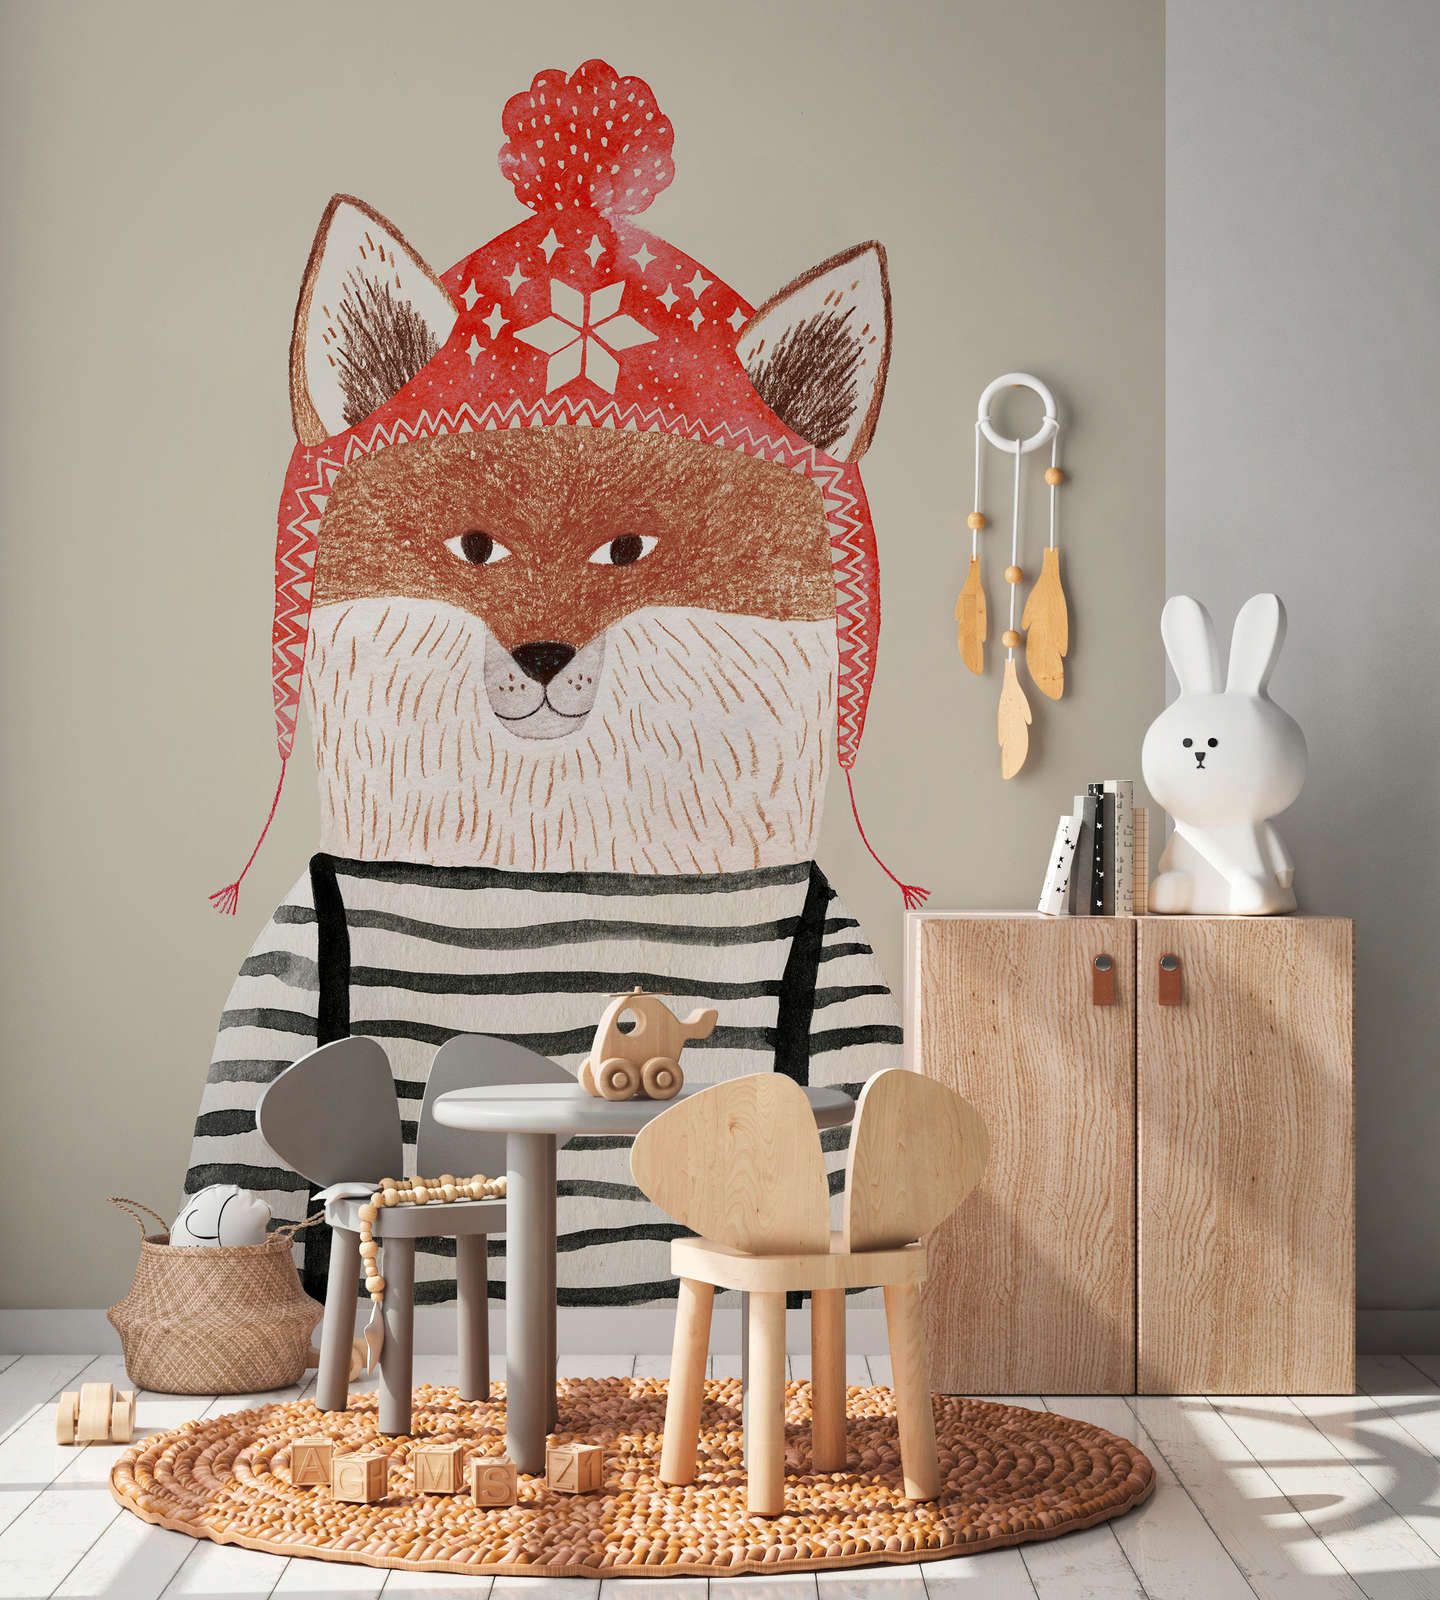             Fox with pom-pom hat mural - Smooth & slightly shiny non-woven
        